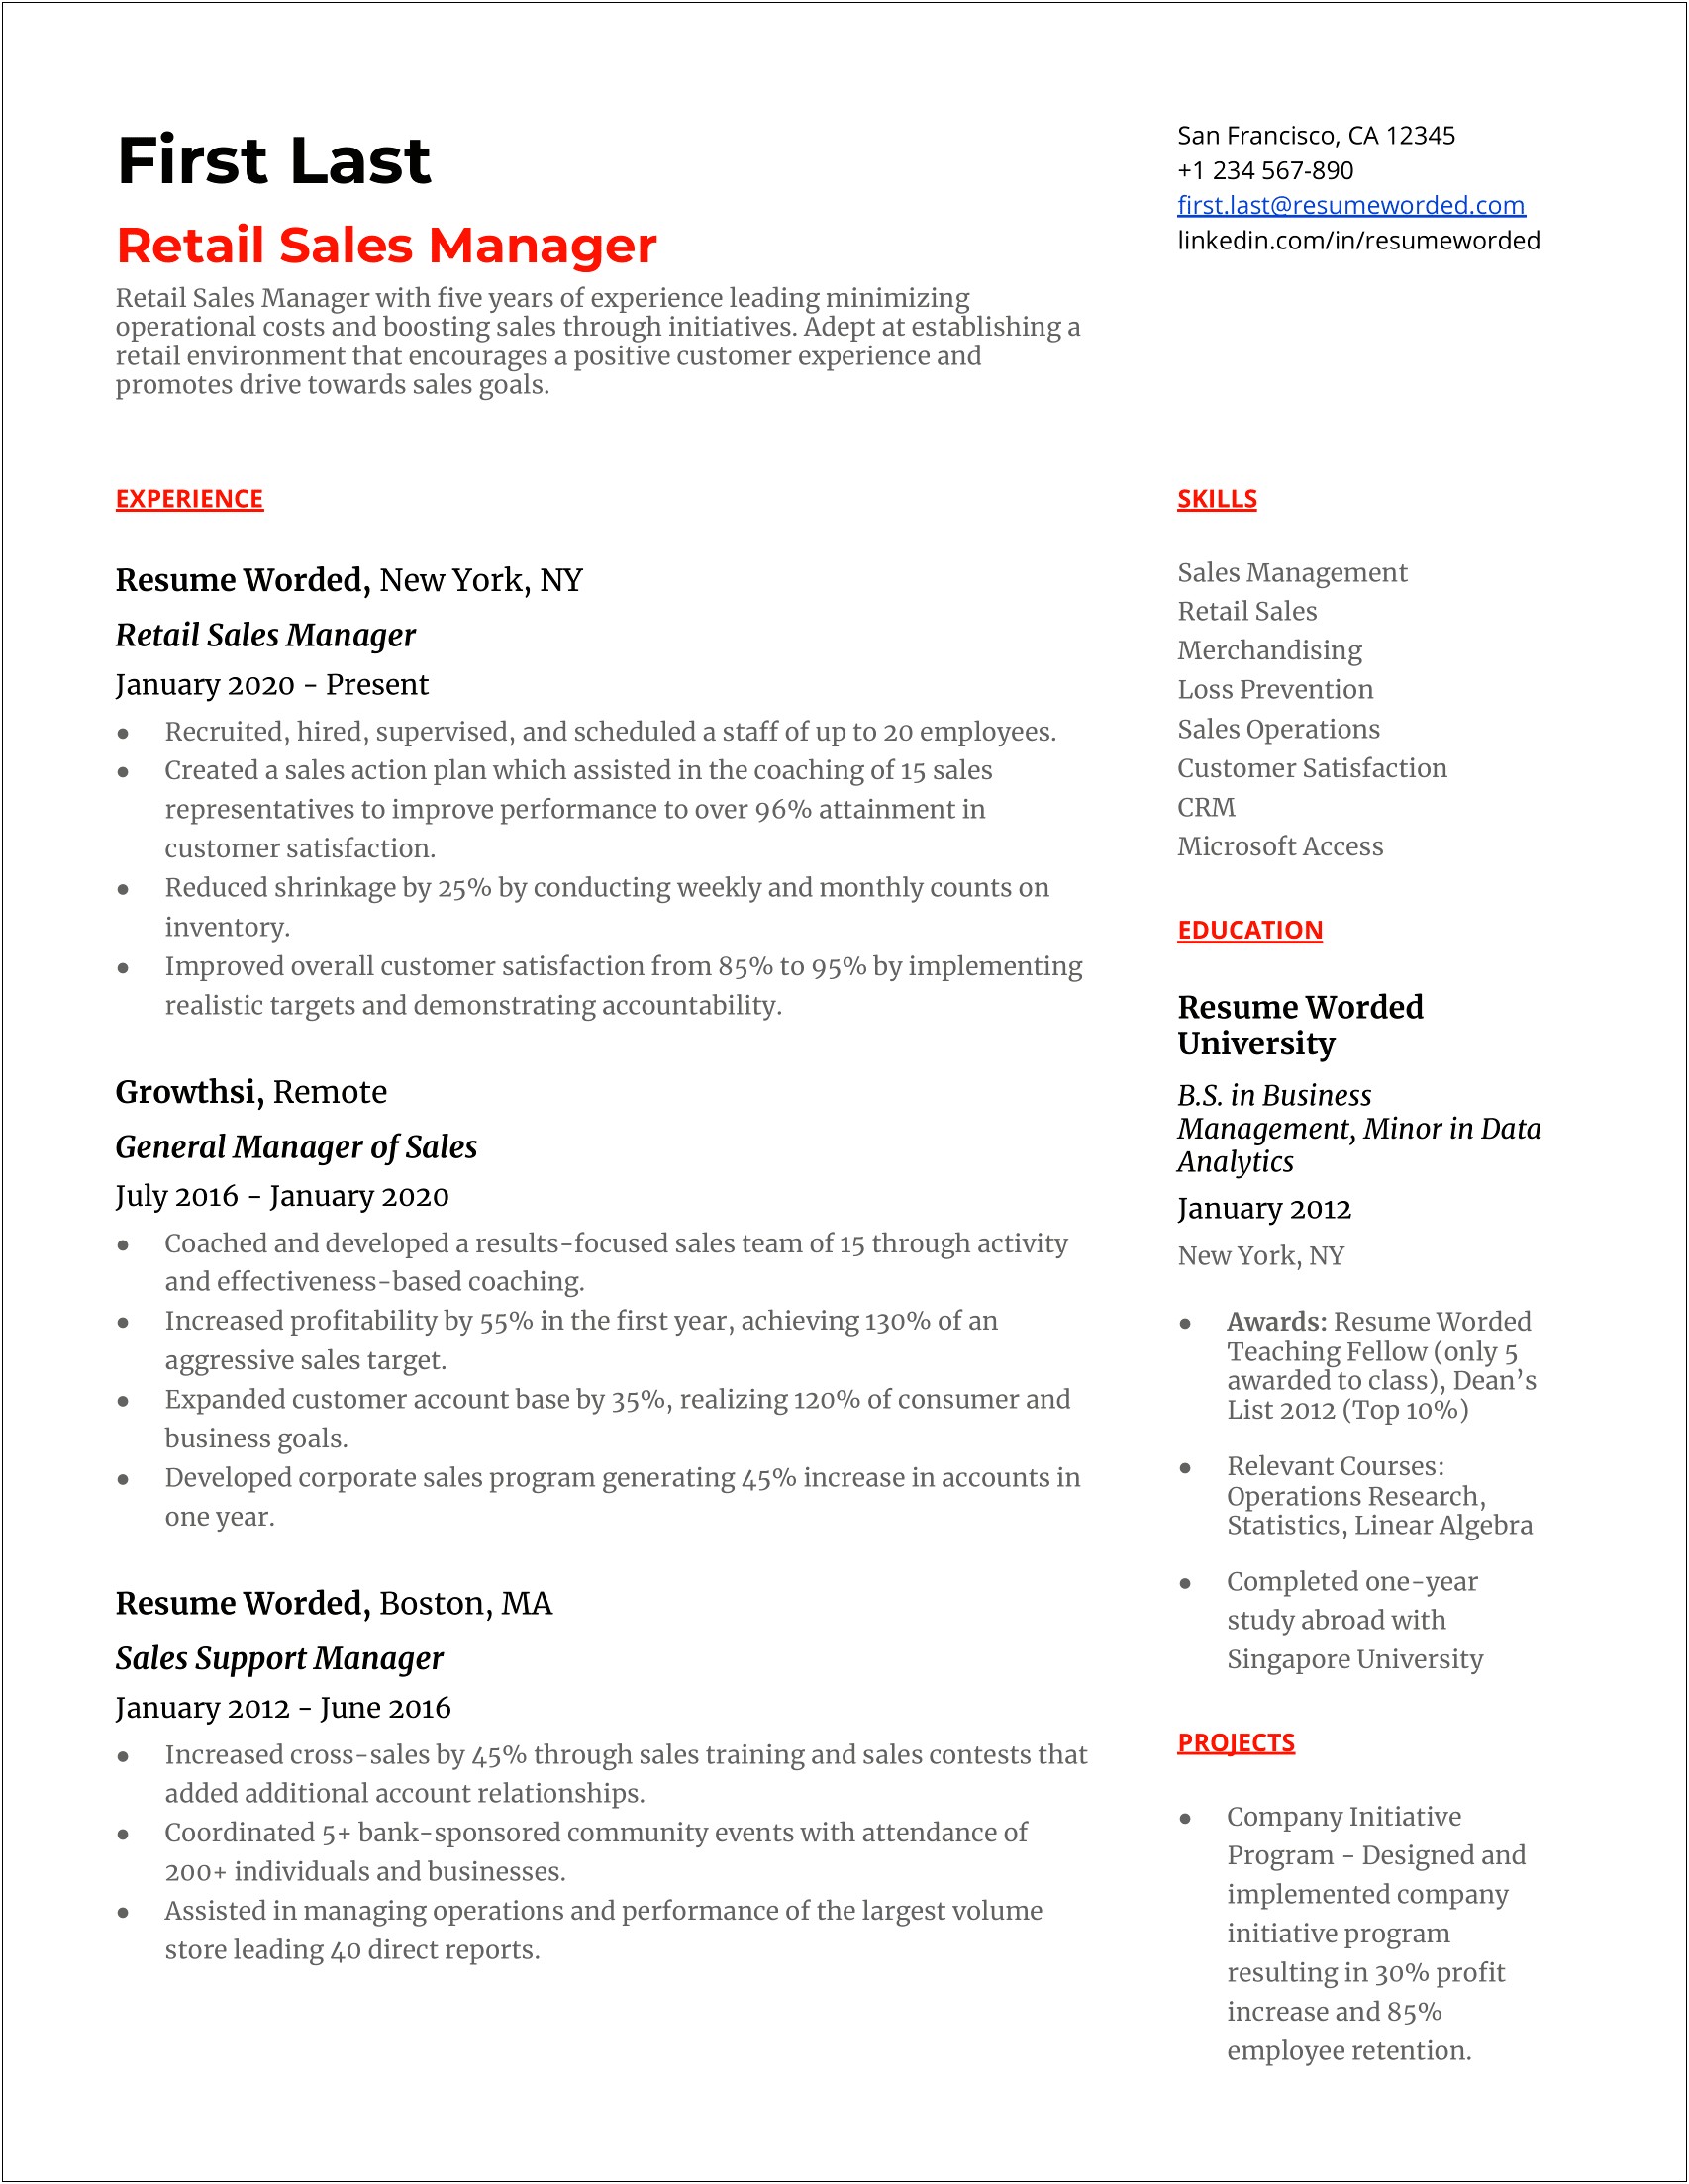 Resume Profile Examples Sales Manager